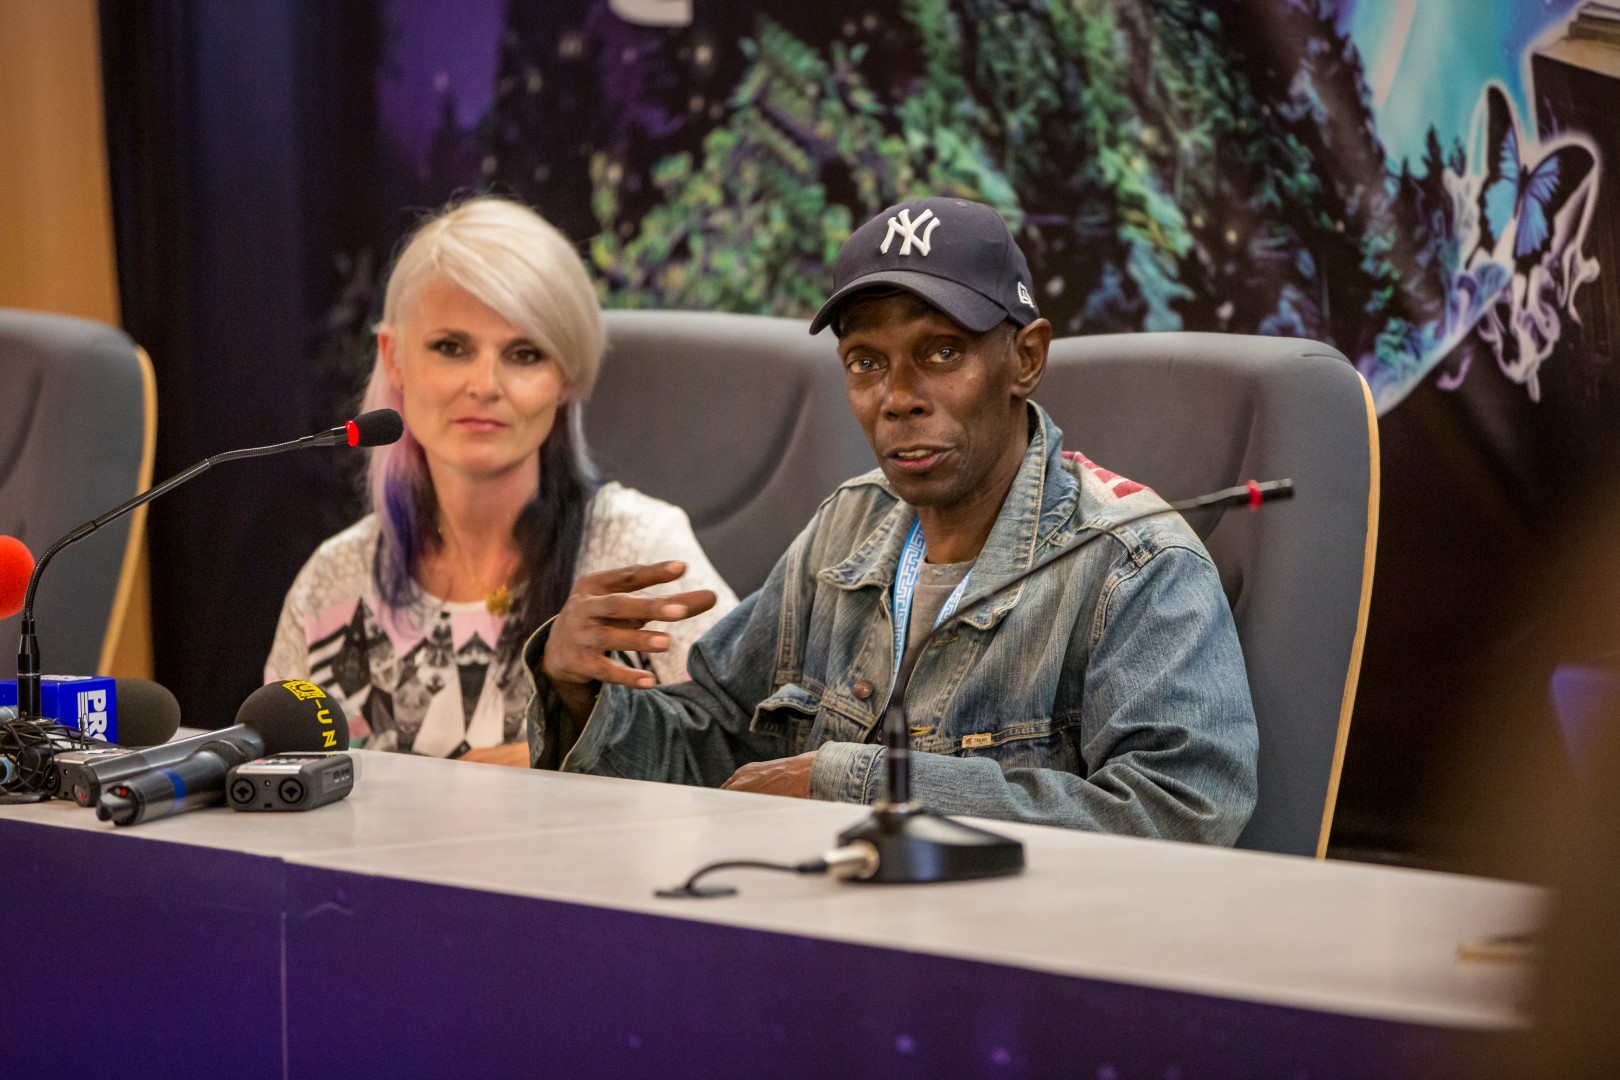 Faithless at Cluj Arena in Cluj-Napoca on August 4, 2016 (2292d0f514)